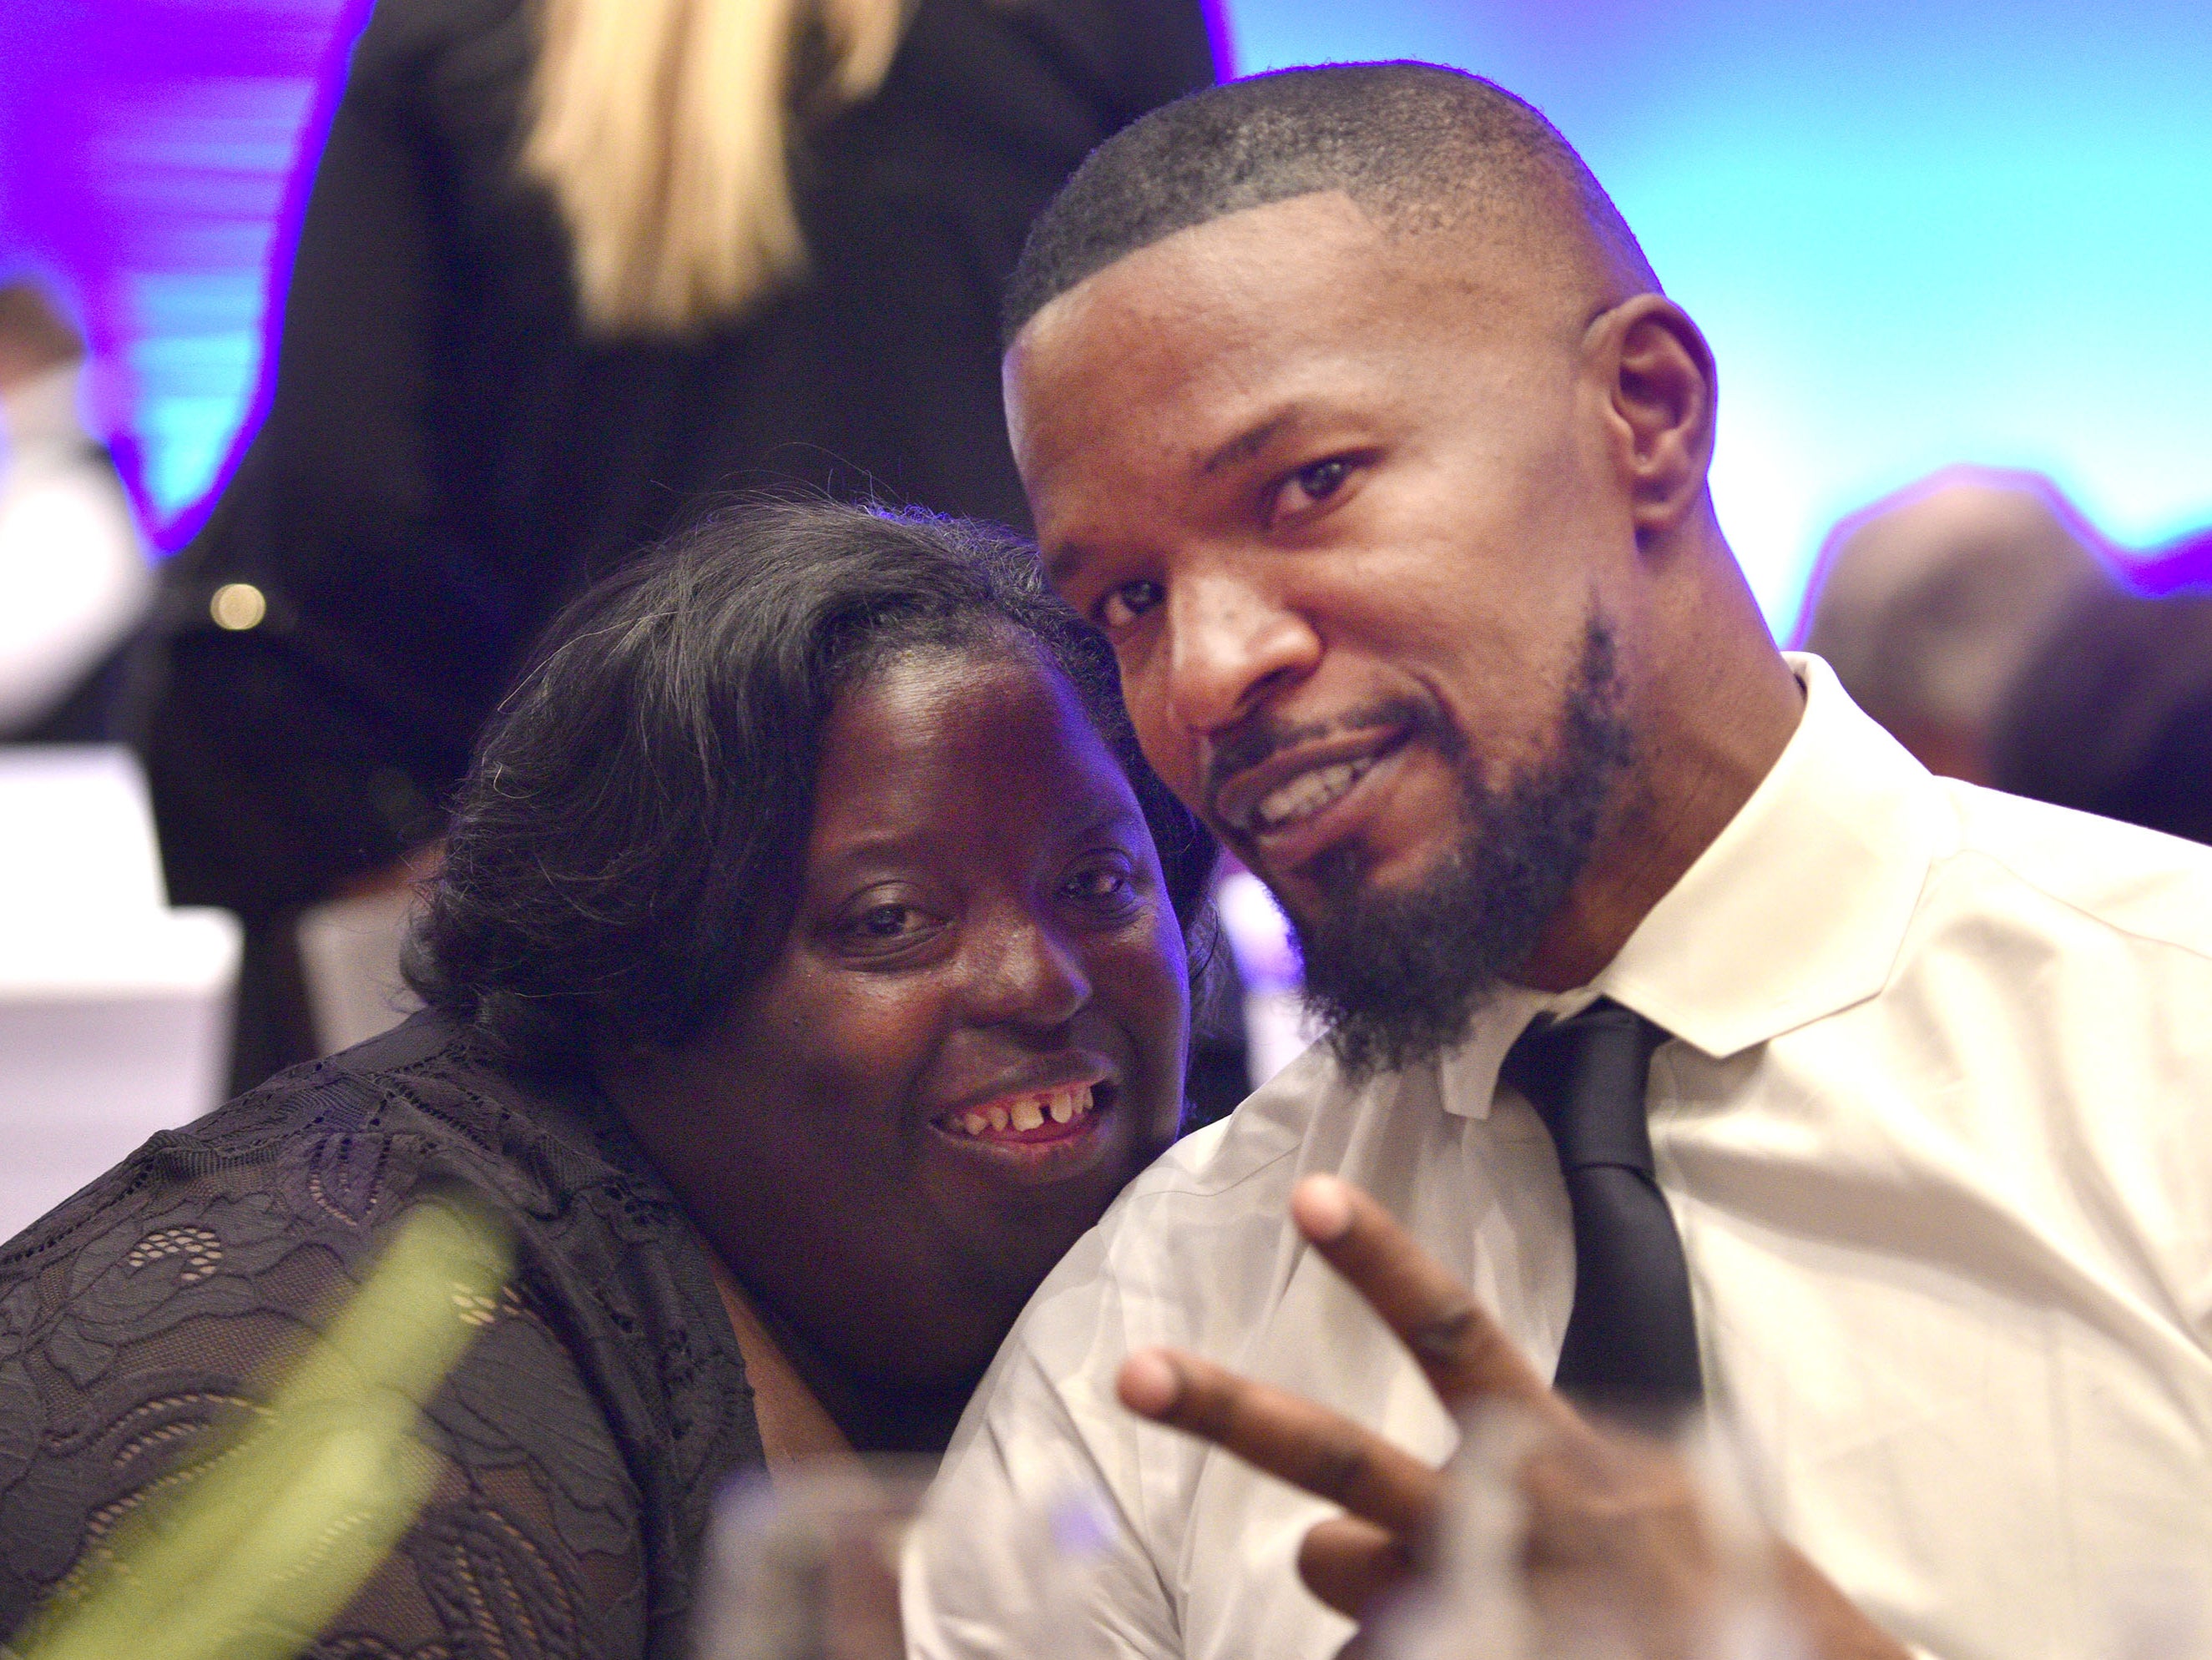 DeOndra Dixon with Jamie Foxx at the Global Down Syndrome Foundation’s ninth annual Be Beautiful Be Yourself Fashion Show on 11 November 2017 in Denver, Colorado